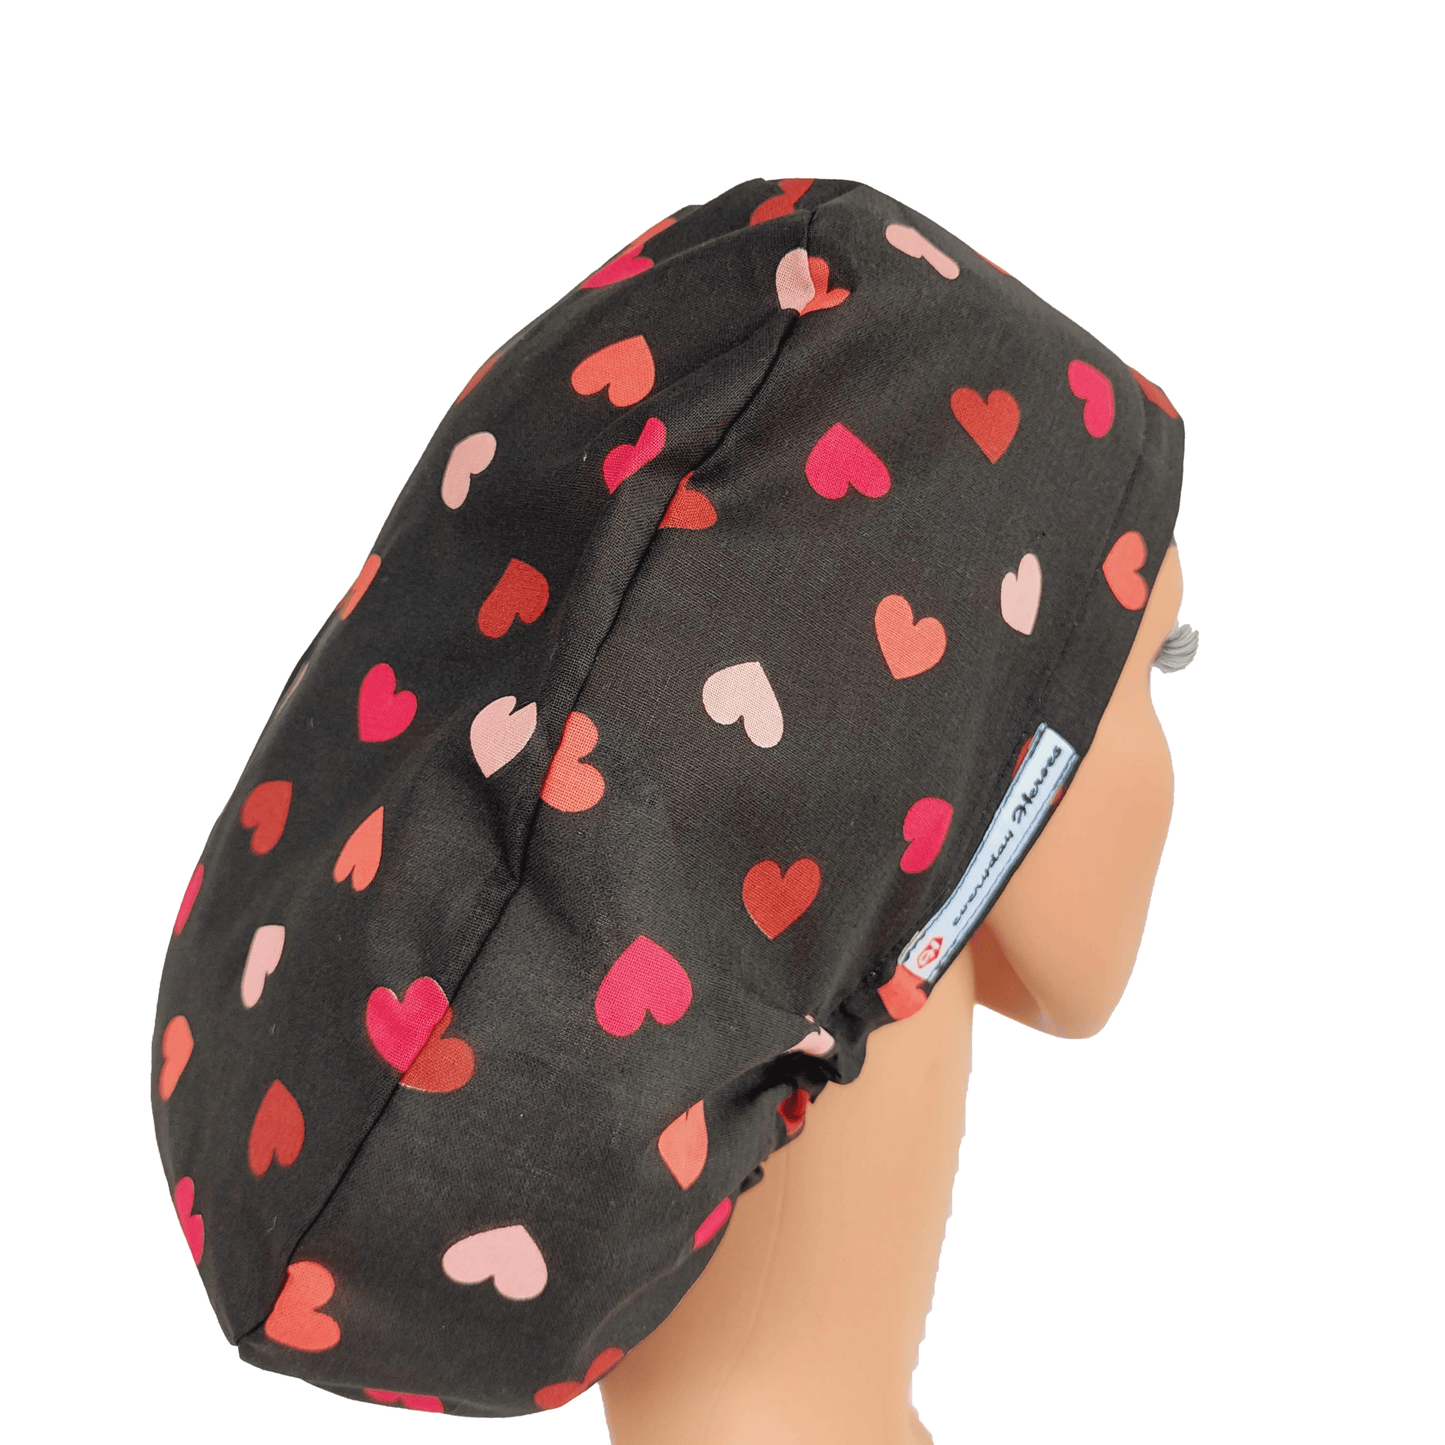 Euro Surgical Scrub Cap With Red and Pink Hearts - [scrub_hat]-[scrub_cap_for_women]-[surgical_cap]